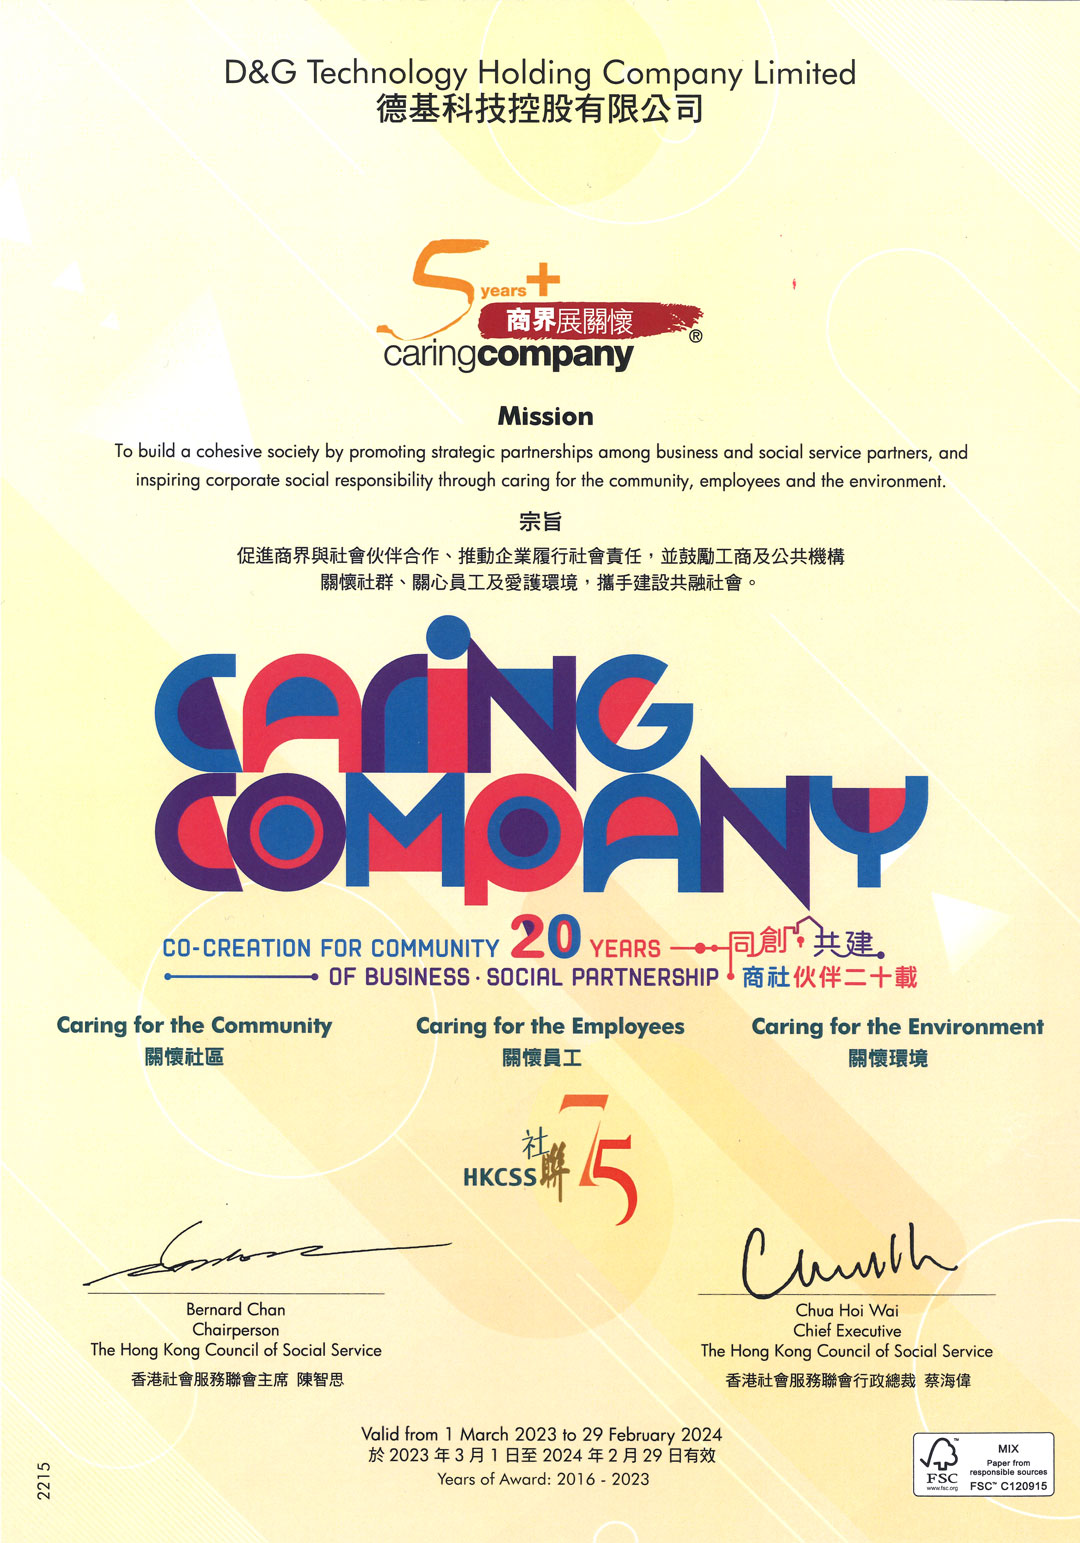 D&G Technology was awarded Caring Company Logo for 7 consecutive years